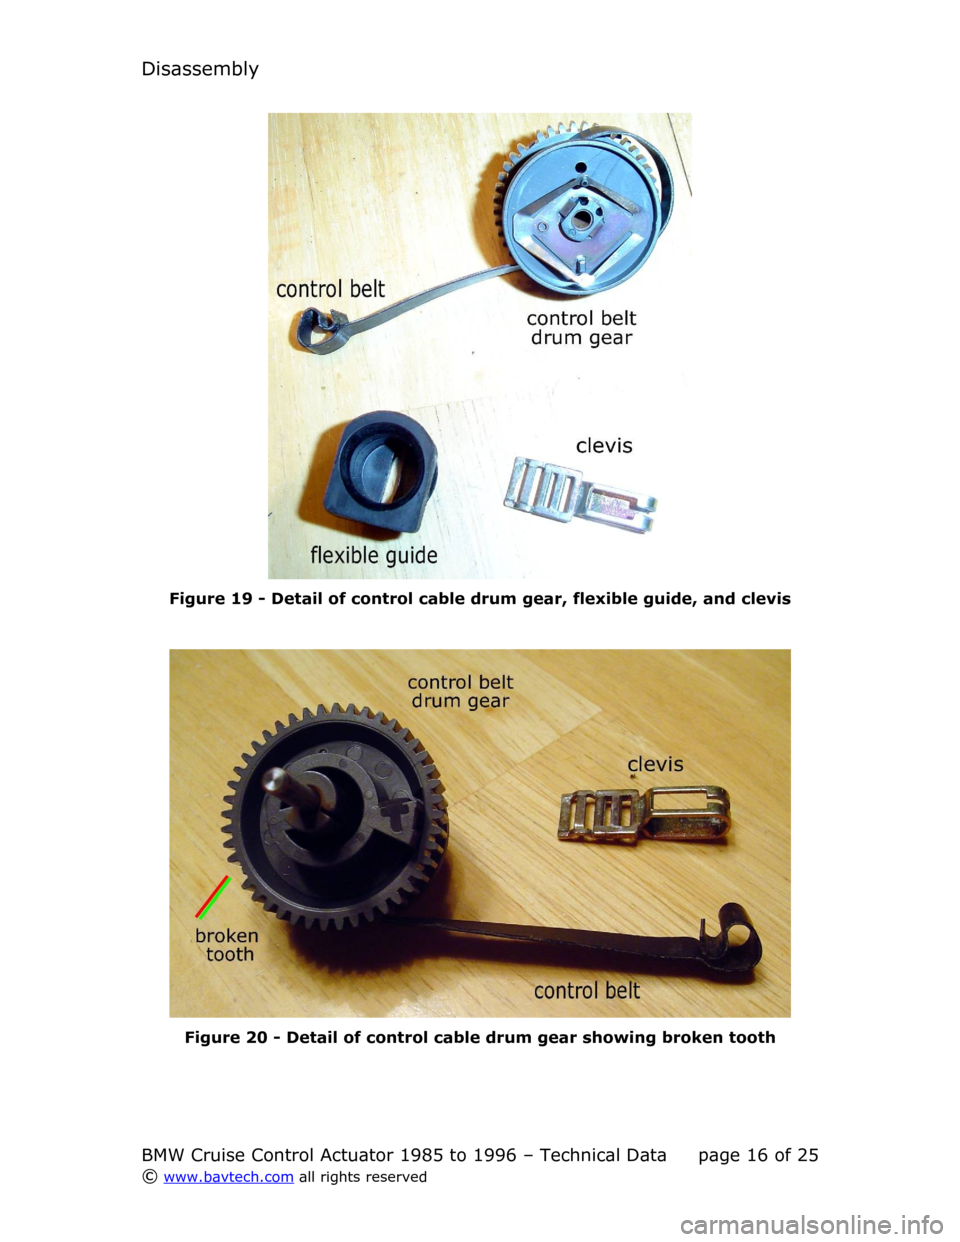 BMW 5 SERIES 1988 E34 Cruise Control Acutator Technical Data User Guide Disassembly
Figure  19  - Detail of control cable drum gear, flexible guide, and clevis
Figure  20  - Detail of control cable drum gear showing broken tooth
BMW Cruise Control Actuator 1985 to 1996 �